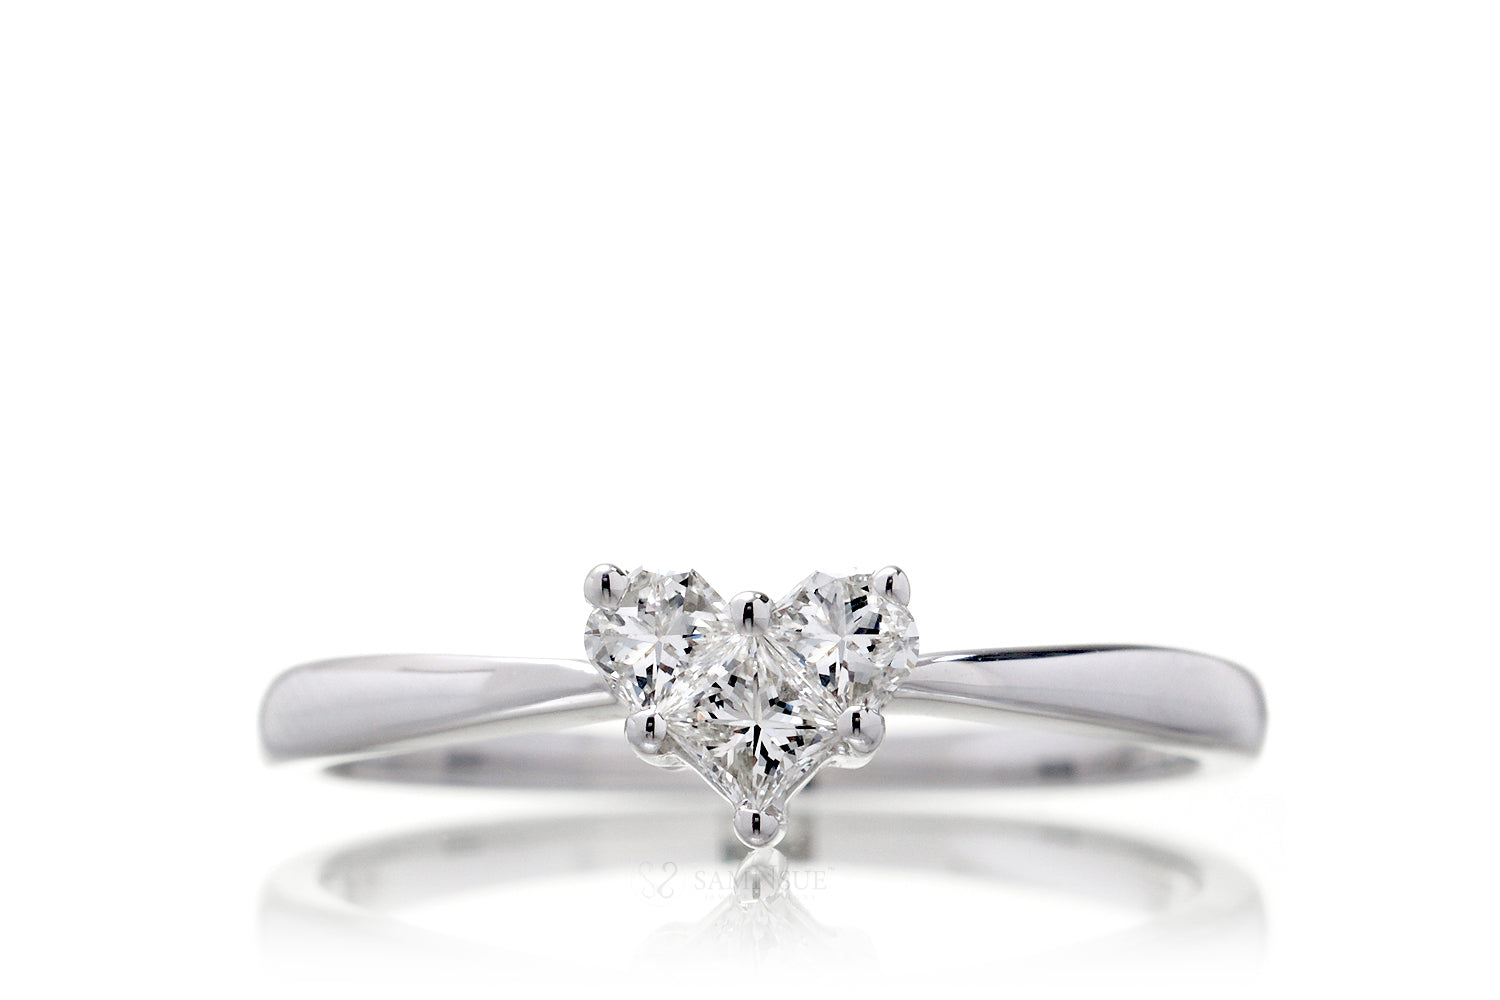 The Lily Diamond Ring